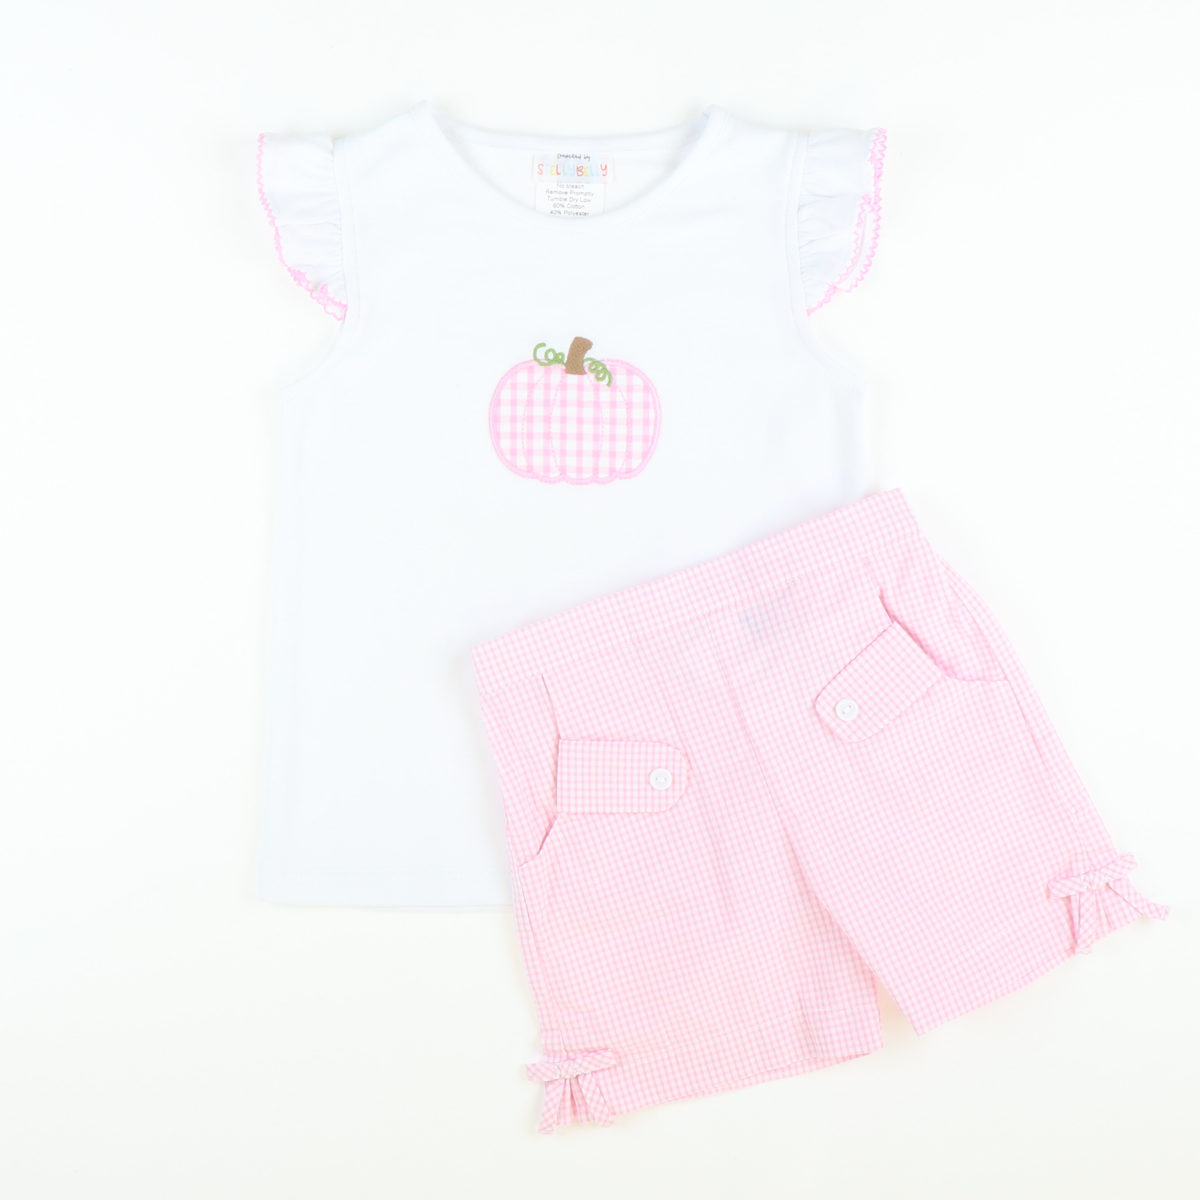 Bow Shorts - Pink Mini Check Seersucker - Stellybelly